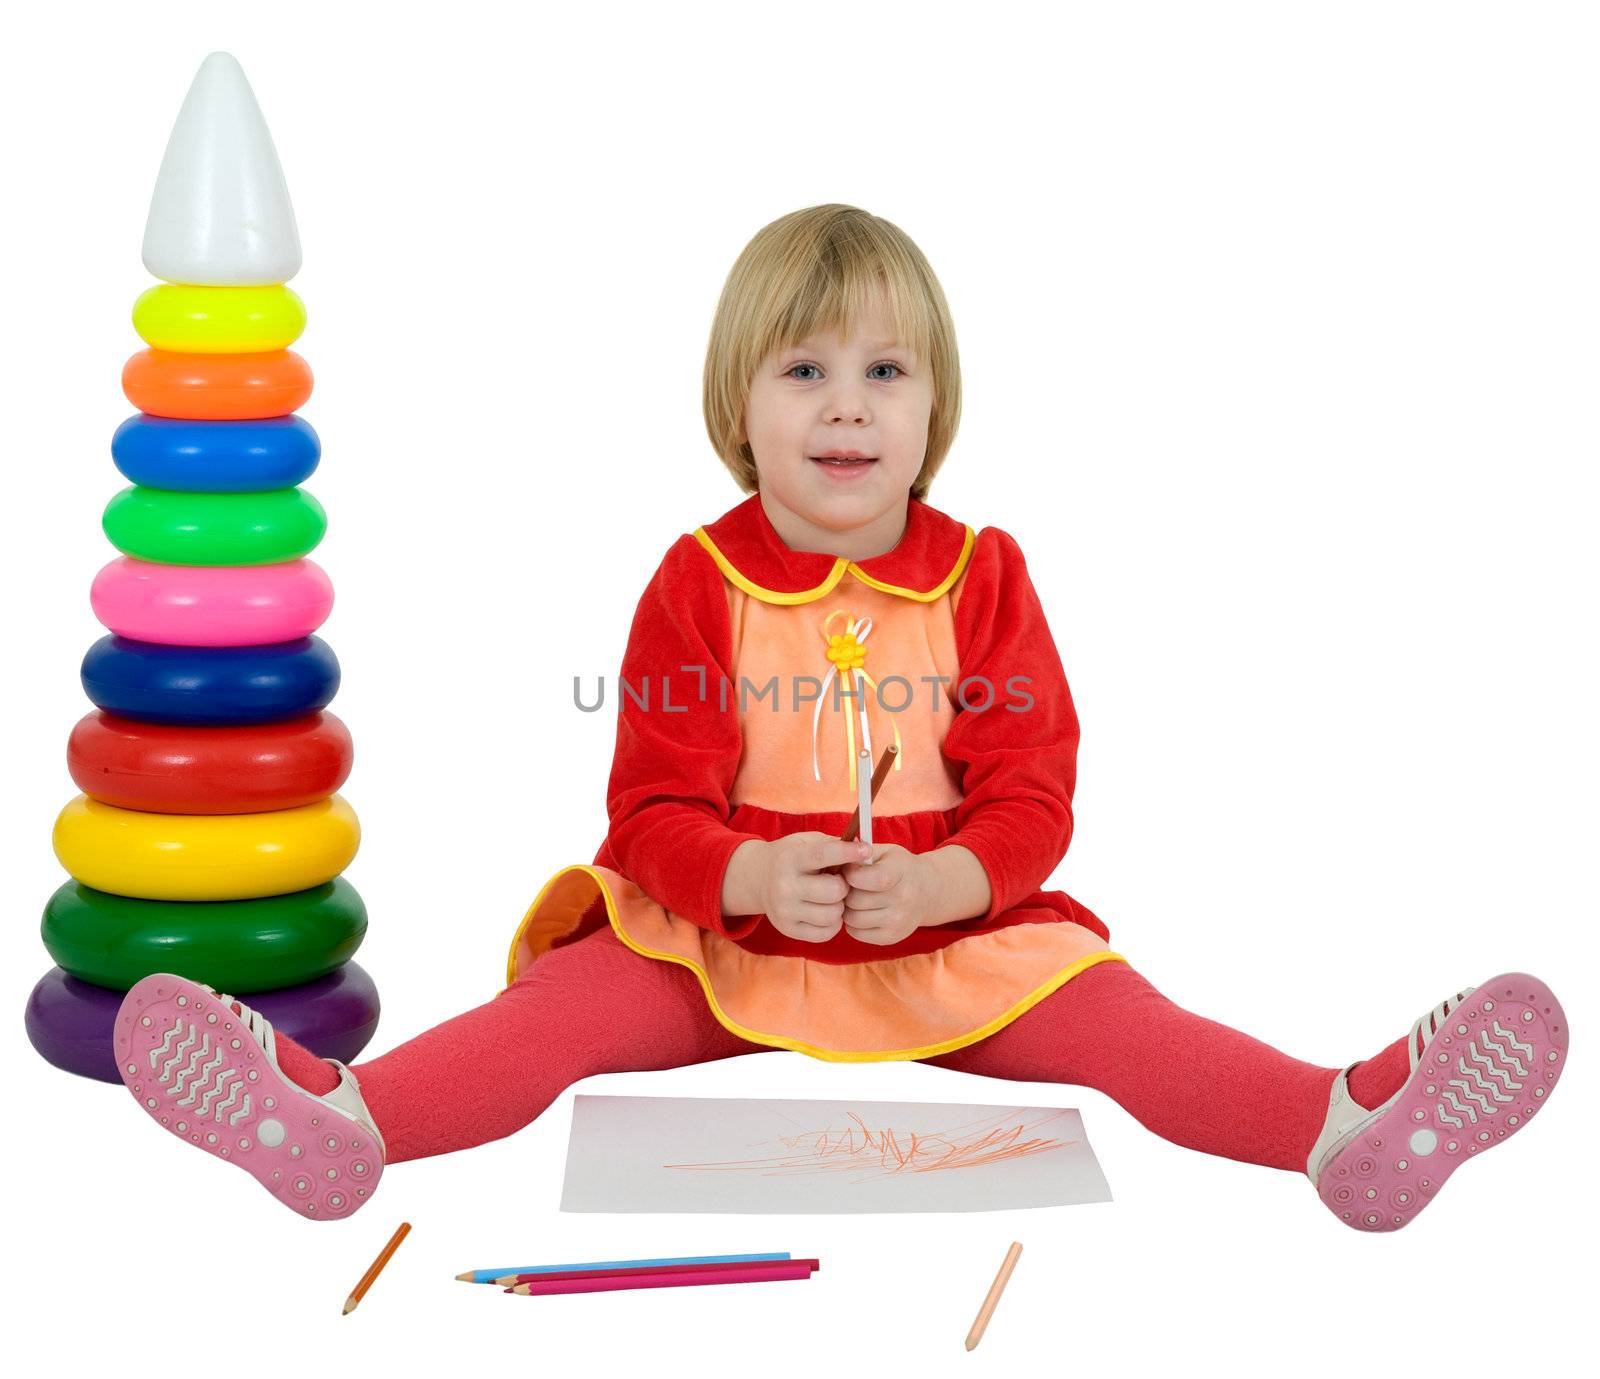 Little girl and toy pyramid and crayons by pzaxe